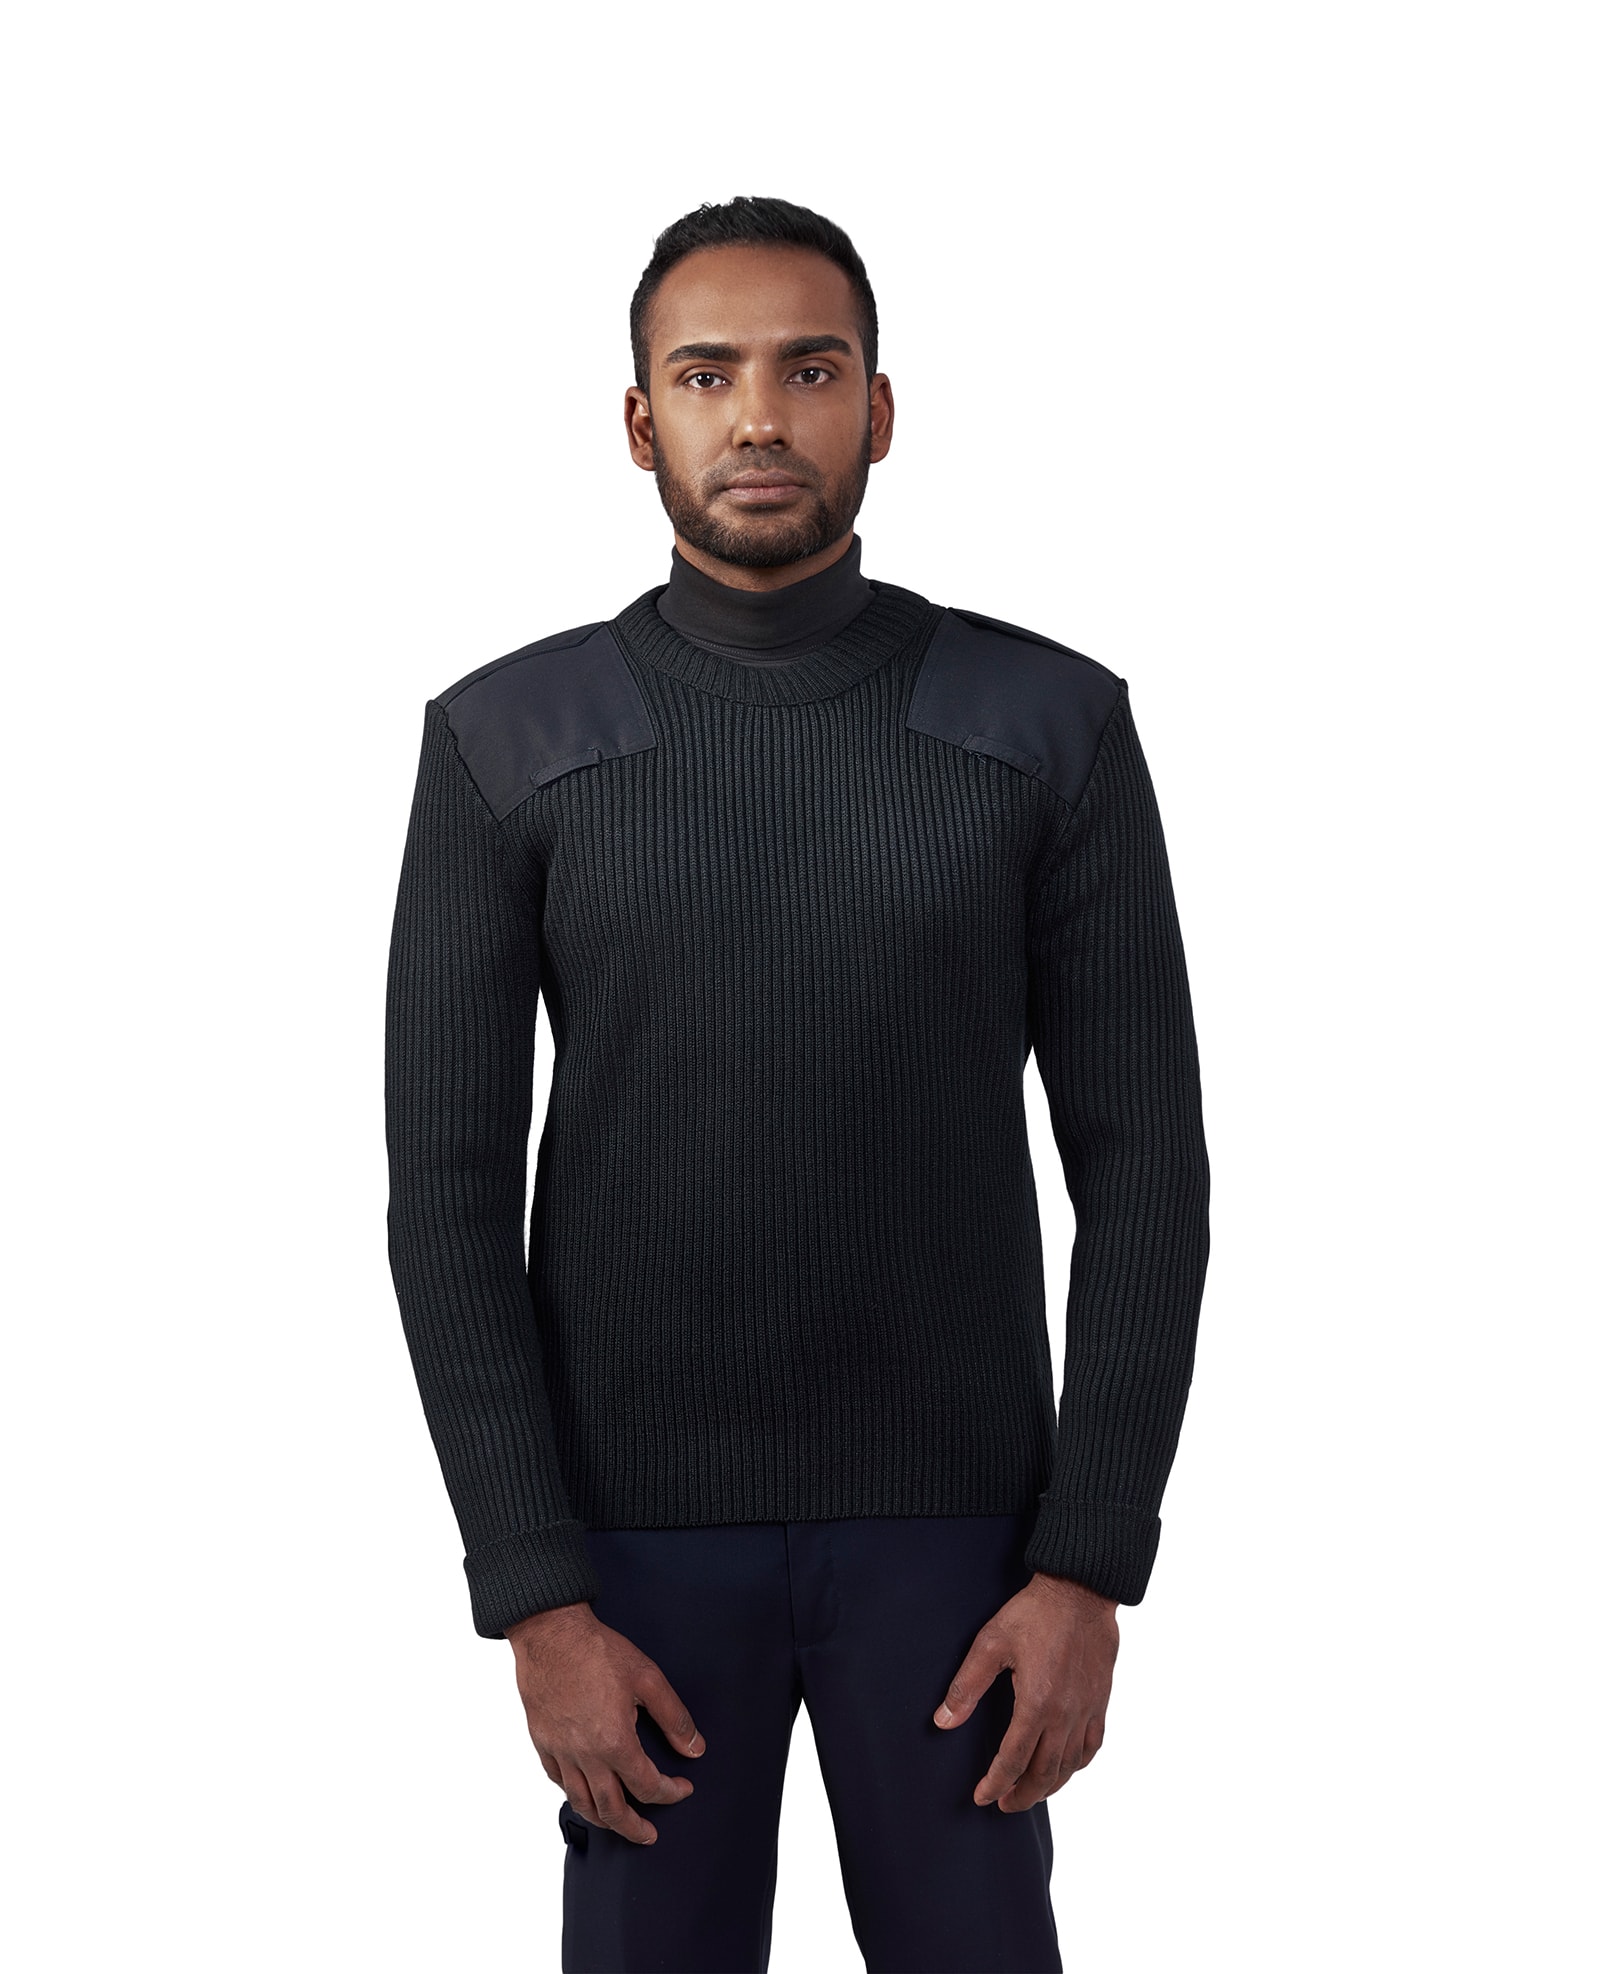 man in crew neck sweater with shoulder and elbow patches